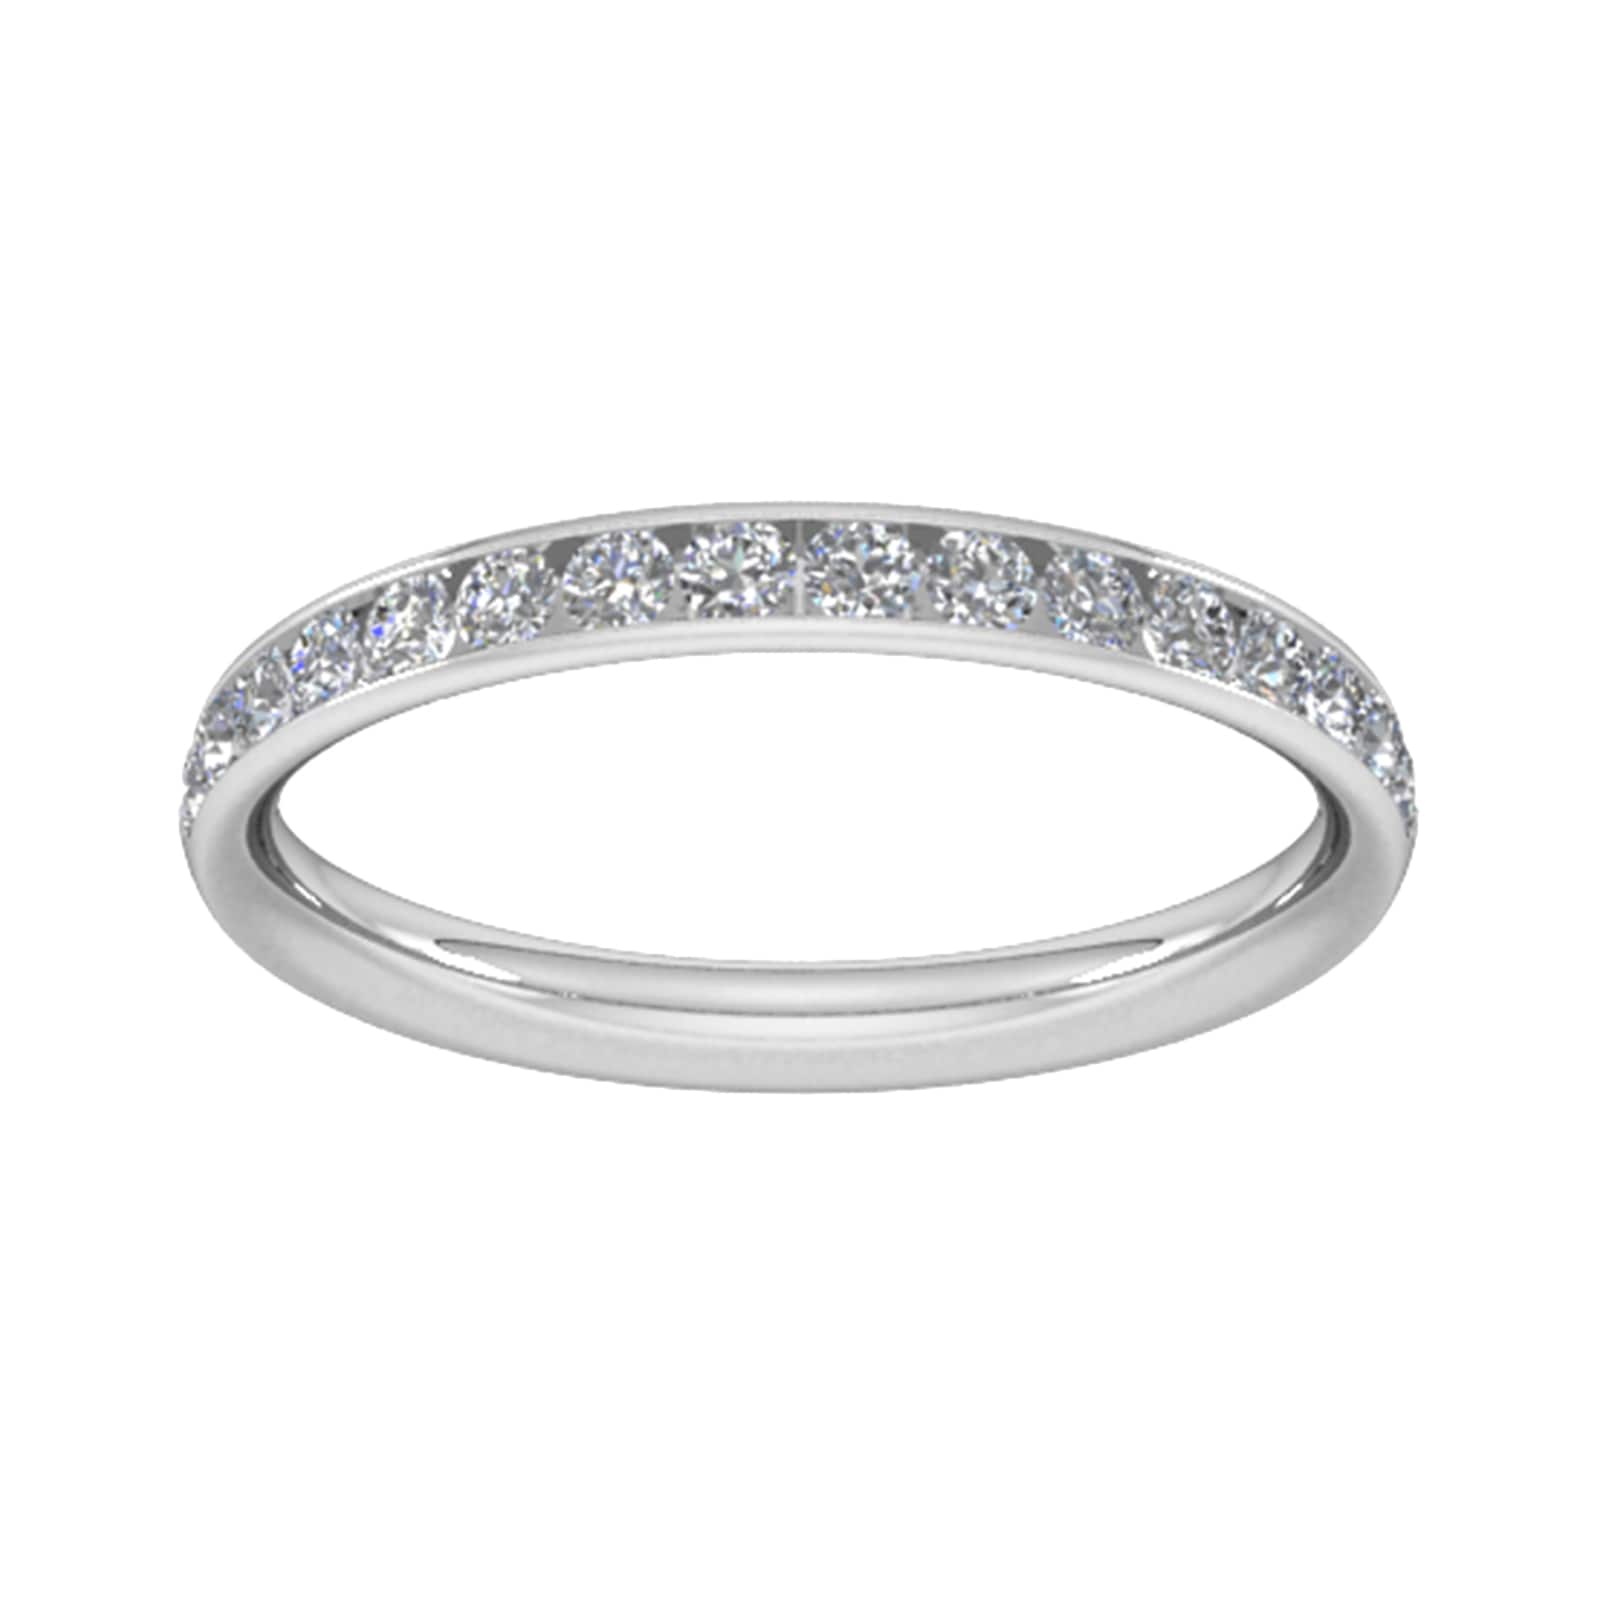 0.44 Carat Total Weight Half Channel Set Brilliant Cut Diamond Wedding Ring In 9 Carat White Gold - Ring Size S